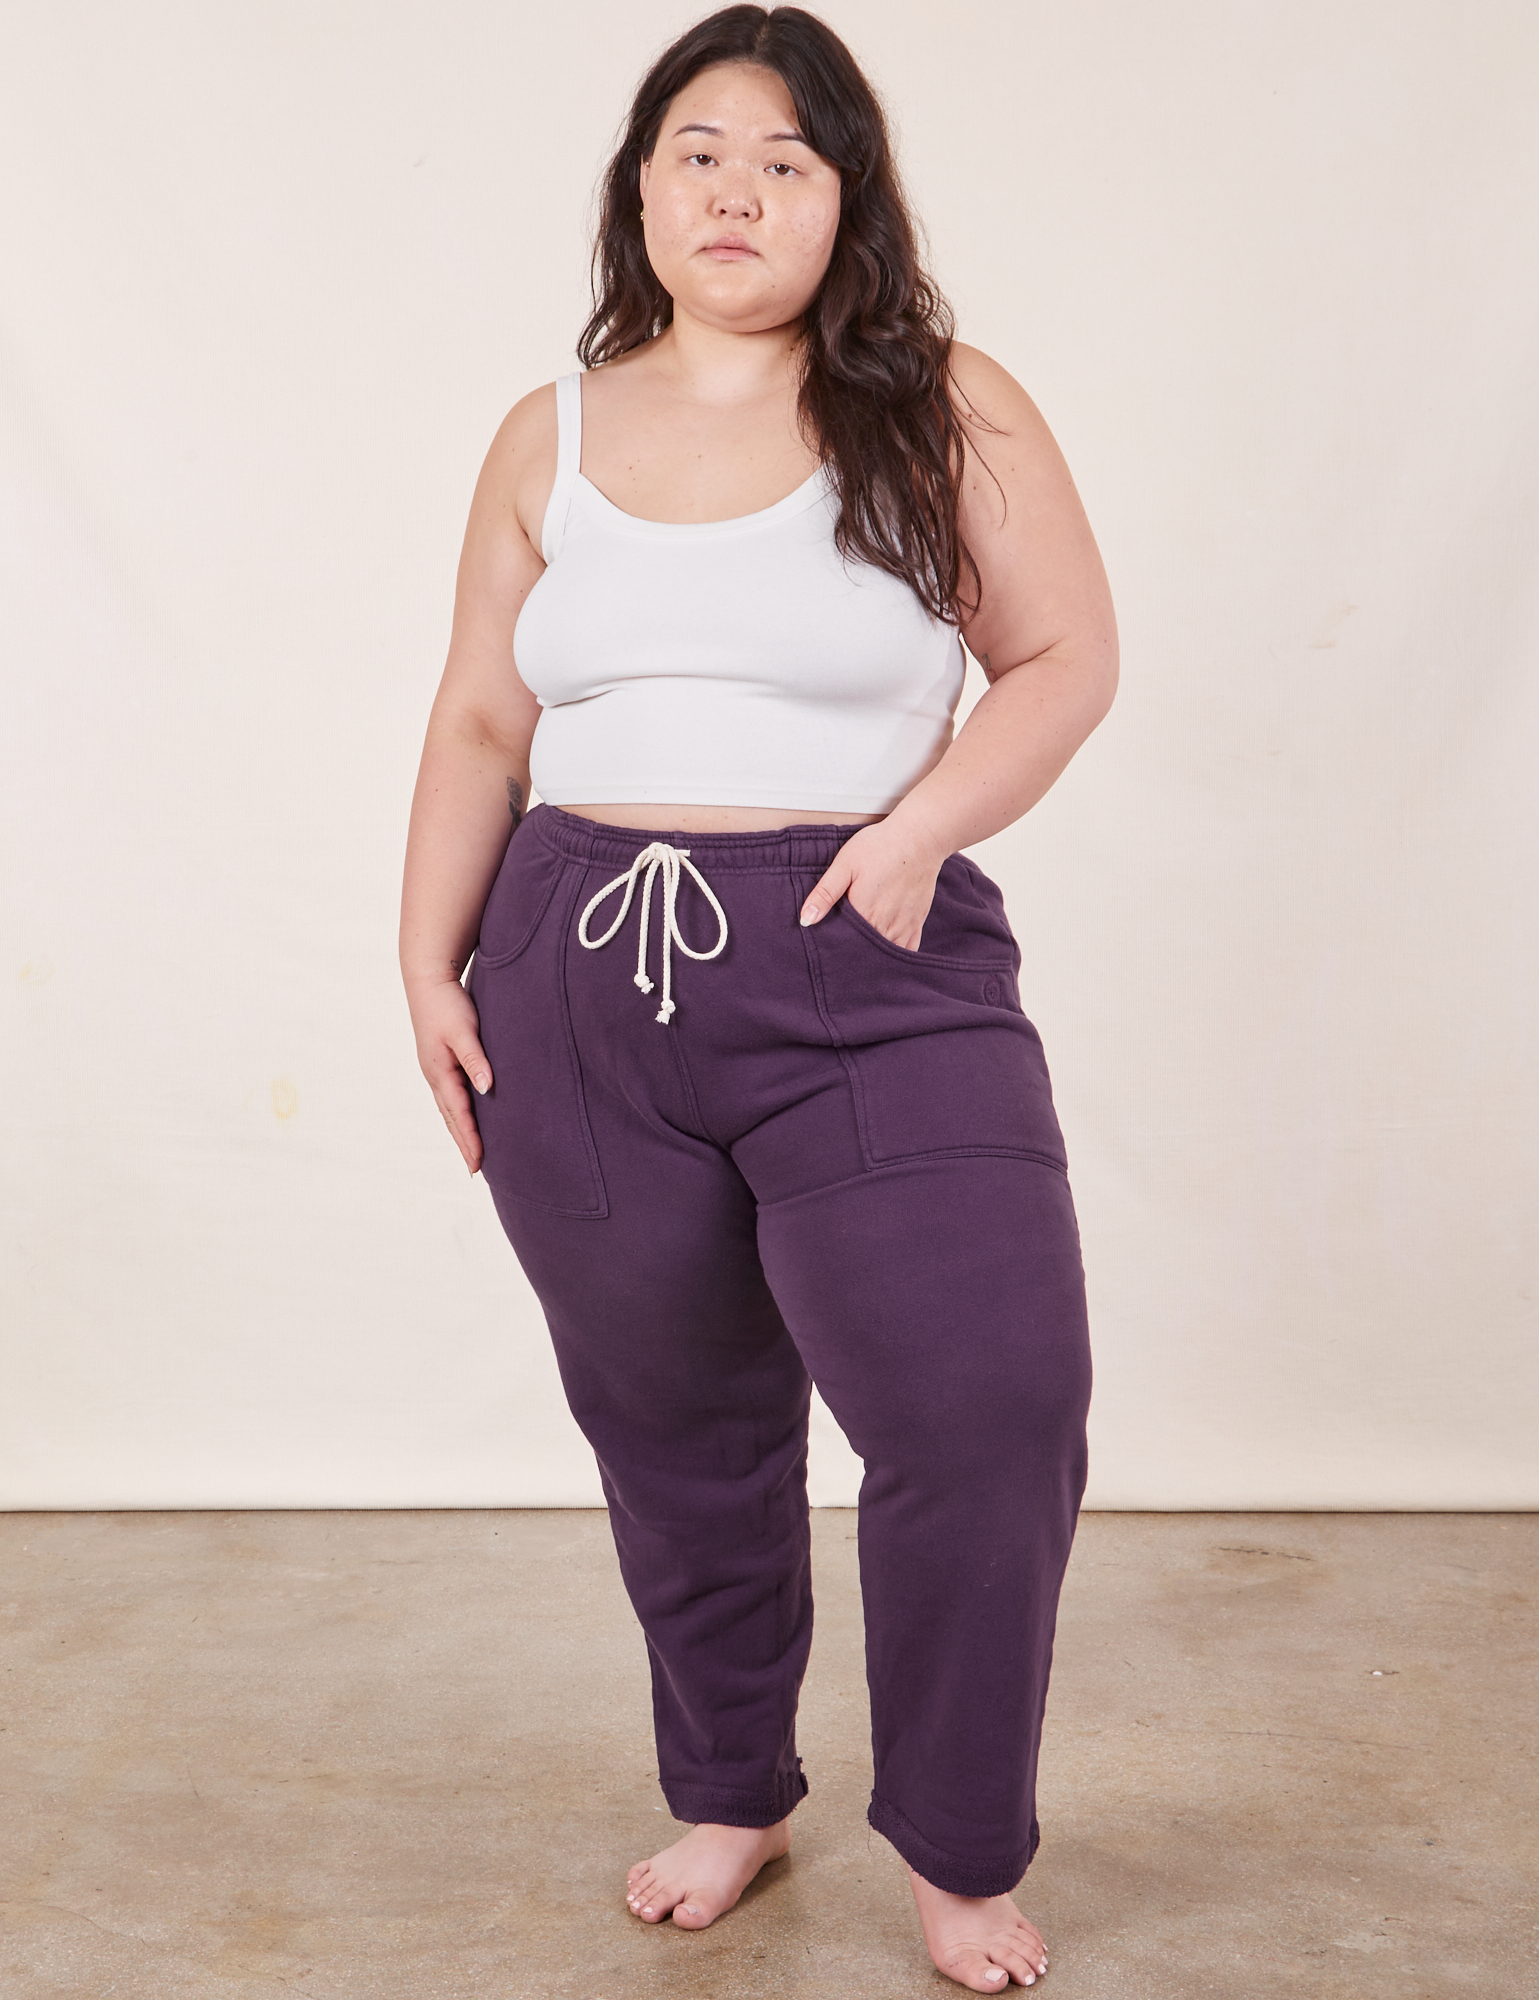 Ashley is 5&#39;7&quot; and wearing XL Cropped Rolled Cuff Sweatpants in Nebula Purple paired with vintage off-white Cami